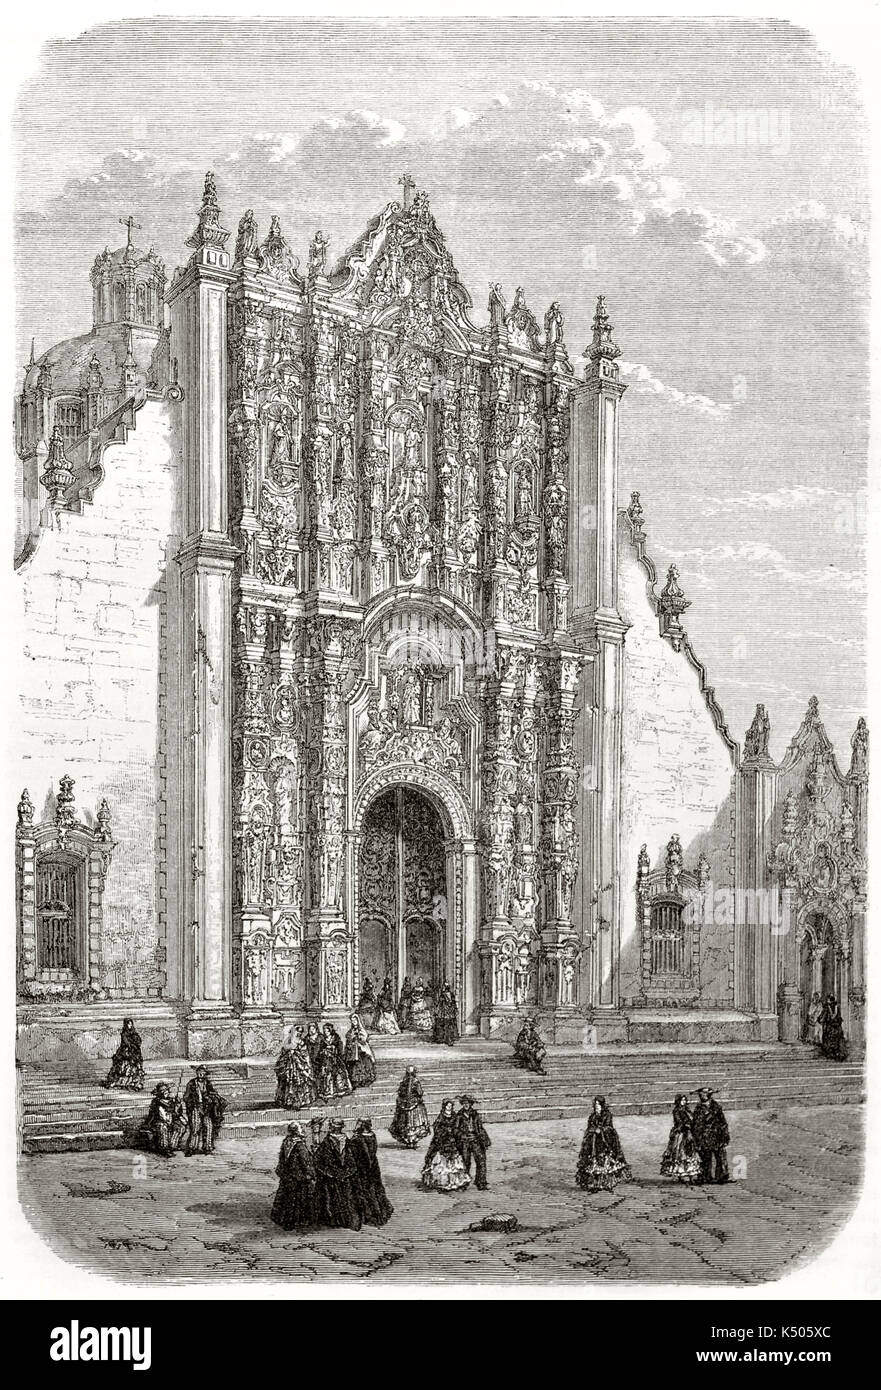 Ancient majestic richly decorated entrance of a stone cathedral. Mexico city metropolitan cathedral main portal. Created by Catenacci after photo of Charnay published on Le Tour du Monde Paris 1862 Stock Photo